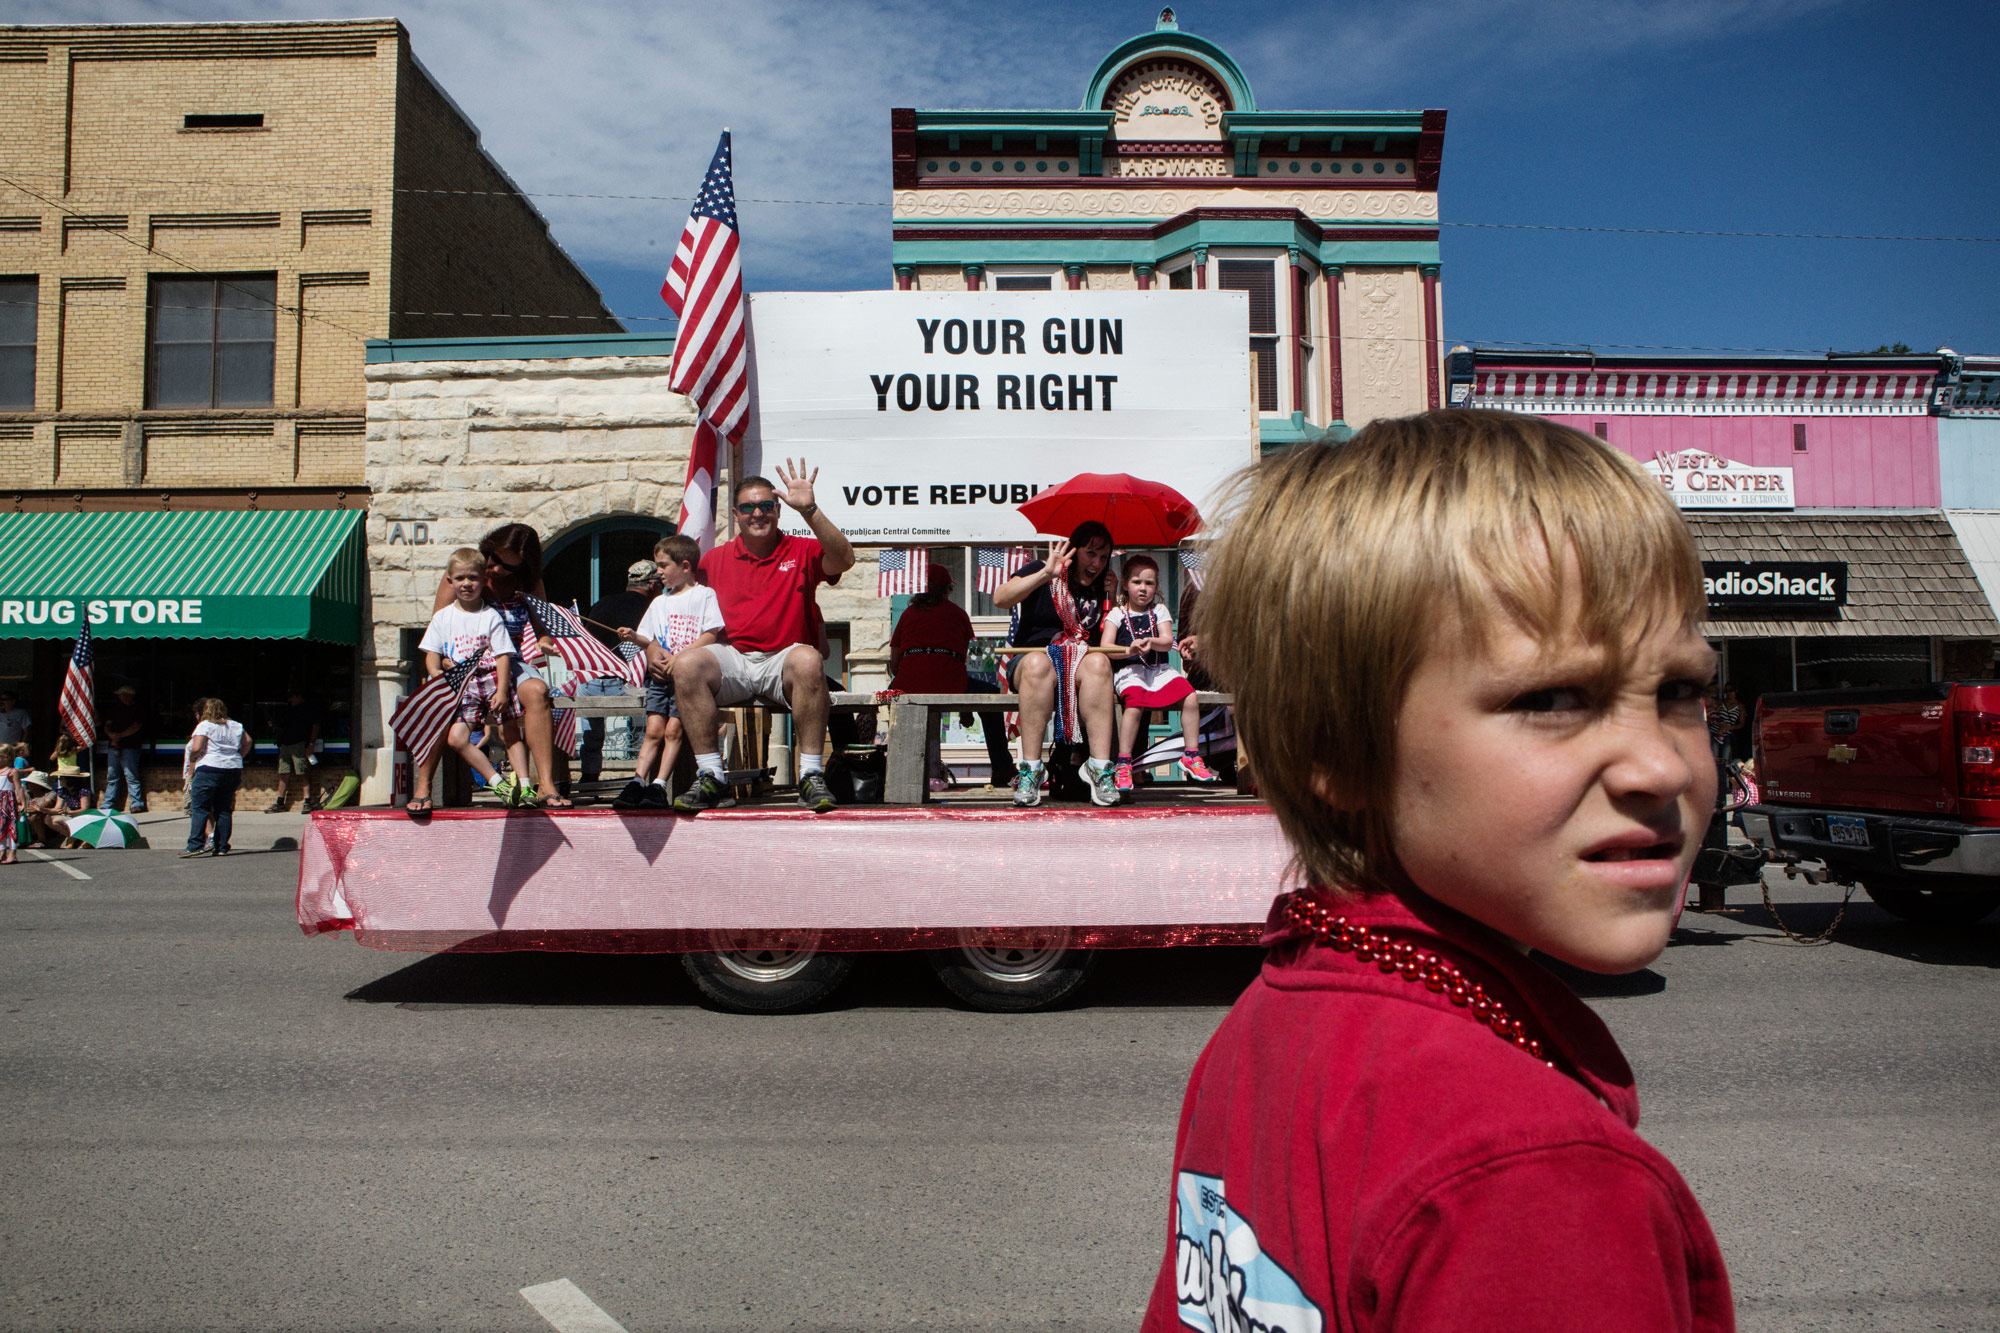 A float during the annual Cherry Days festival in Paonia, Colorado